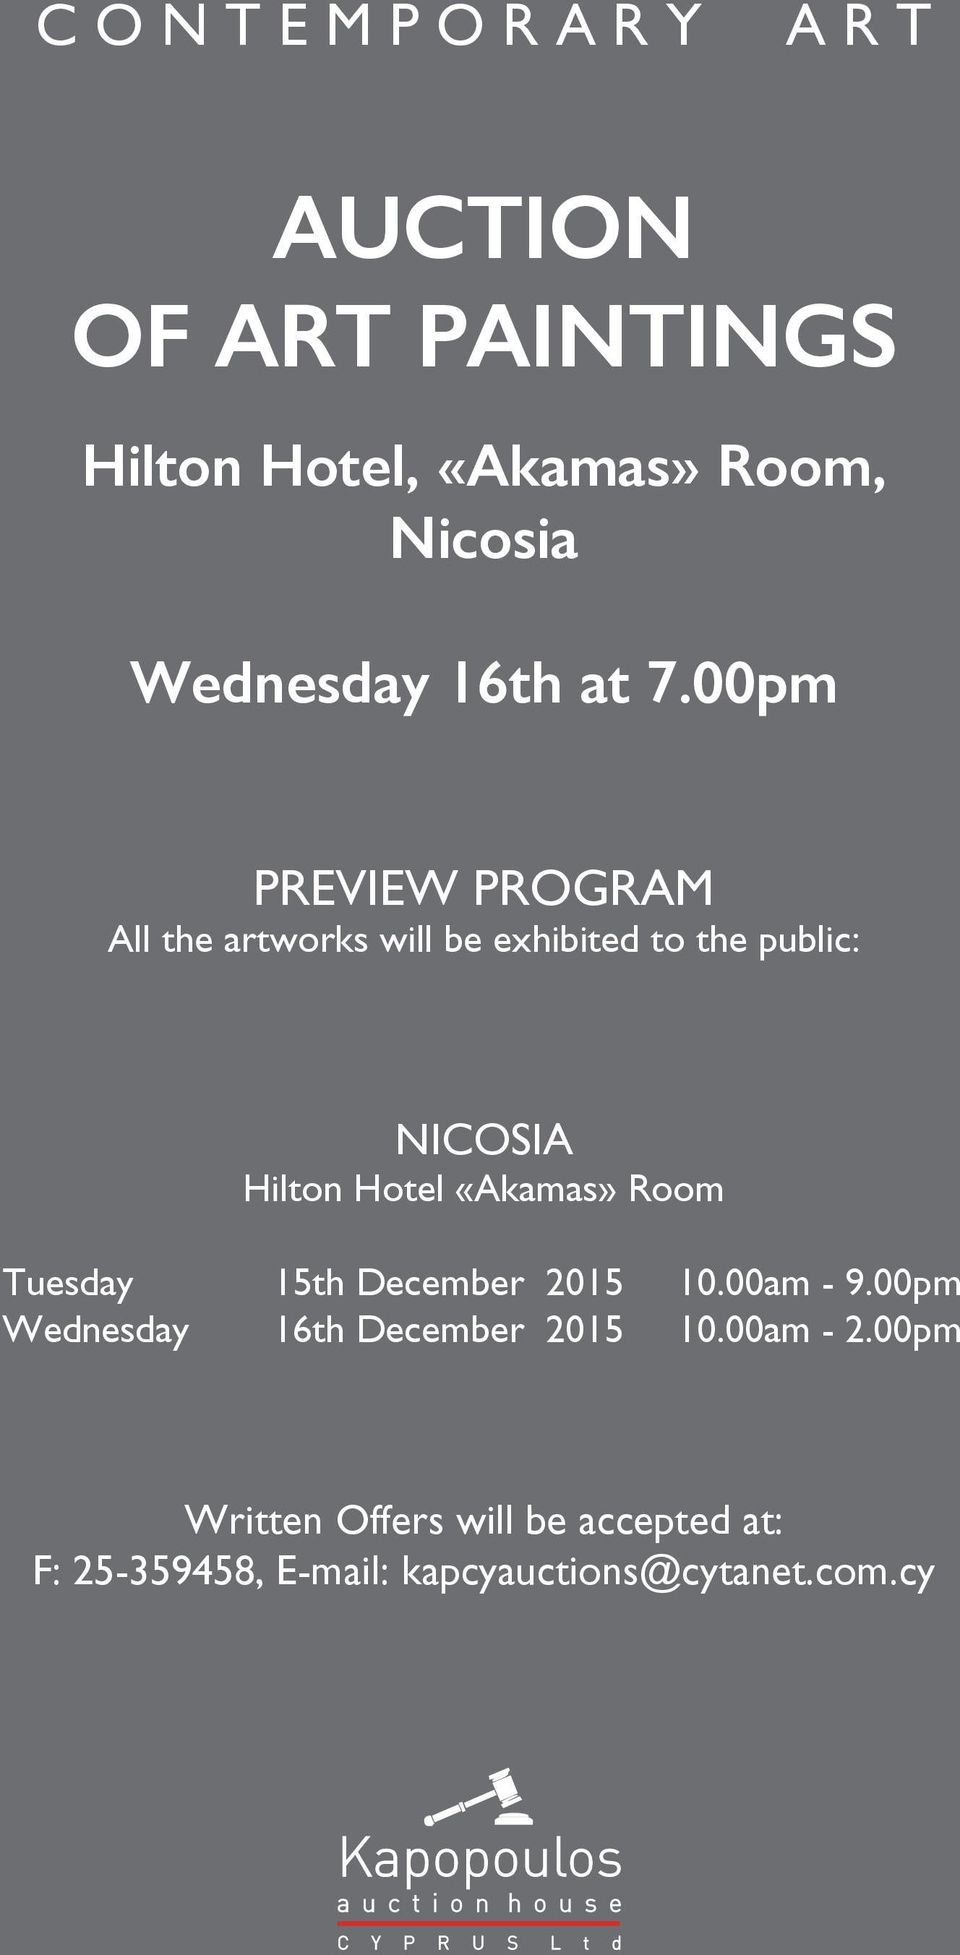 00pm PREVIEW PROGRAM All the artworks will be exhibited to the public: NICOSIA Hilton Hotel